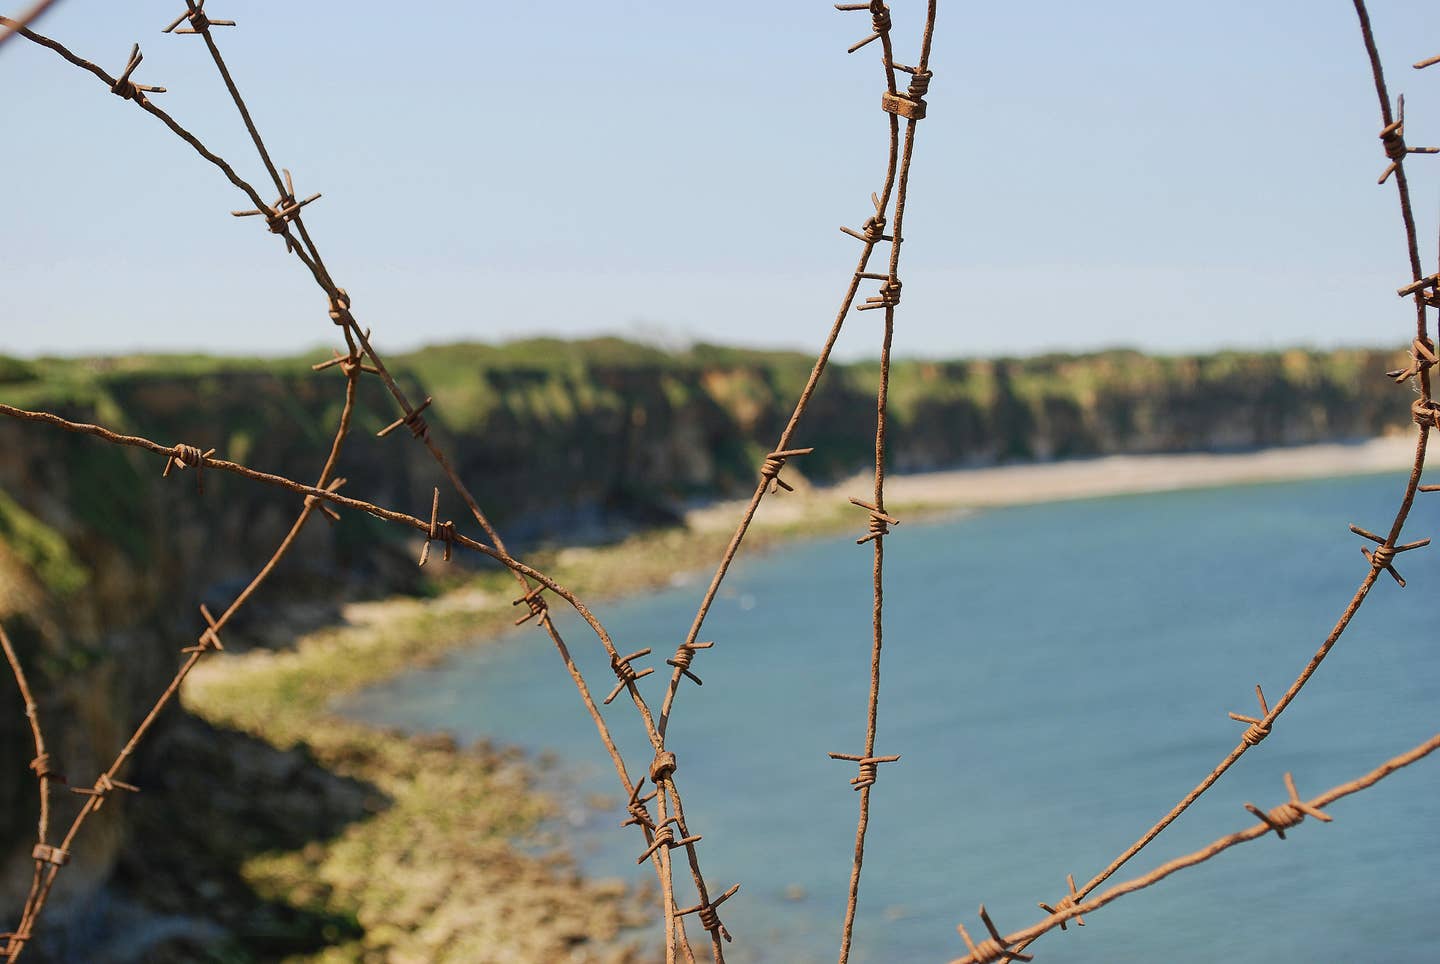 normandy beaches from pointe du hoc